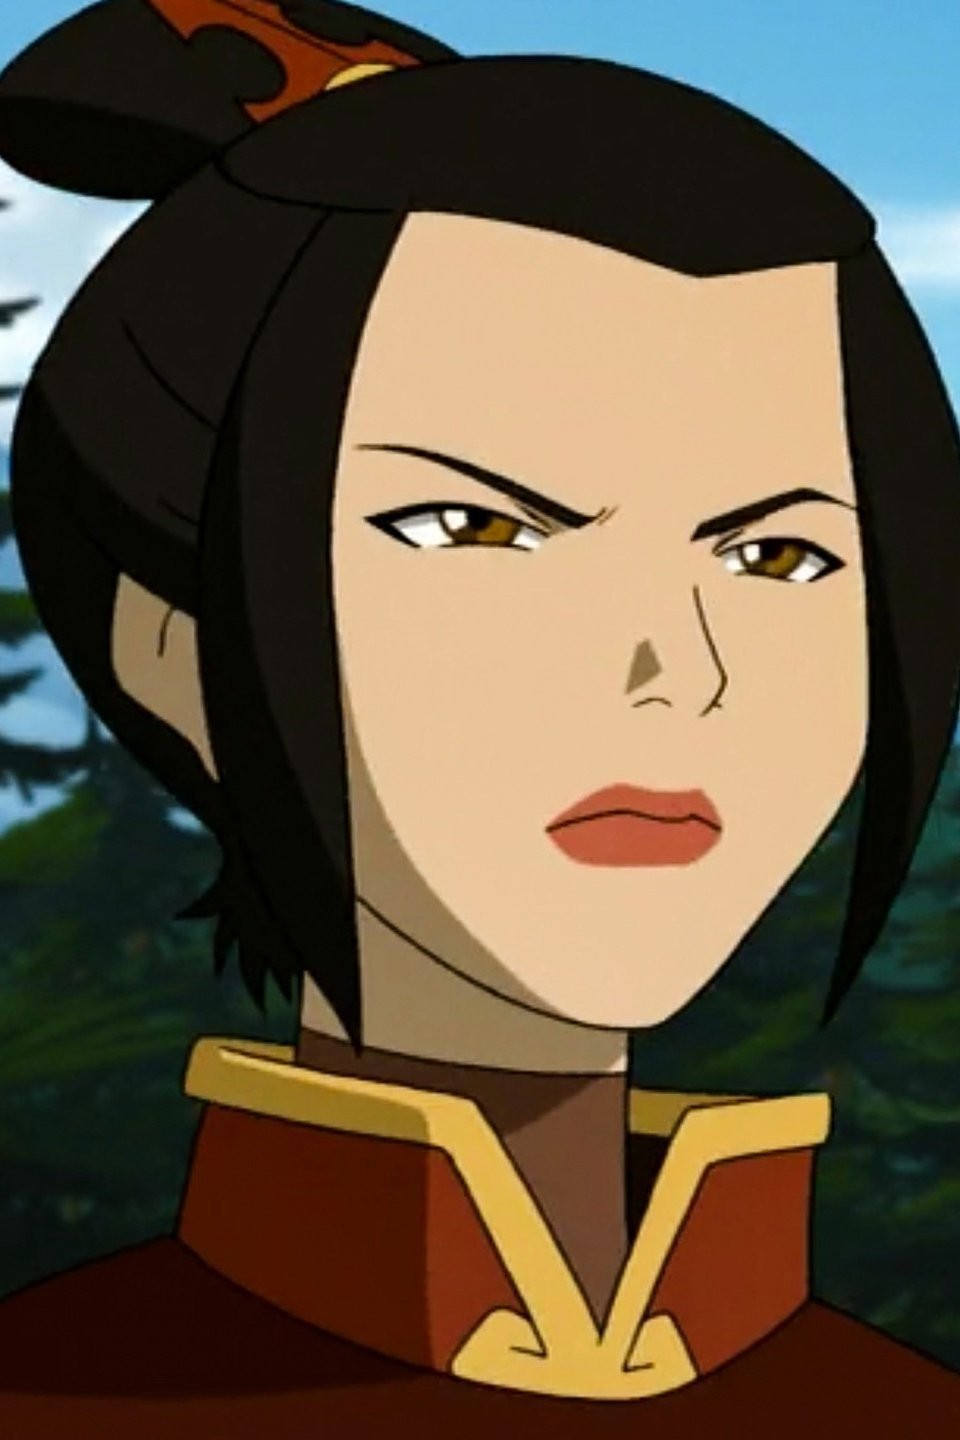 Avatar: The Last Airbender S2, Episode 18